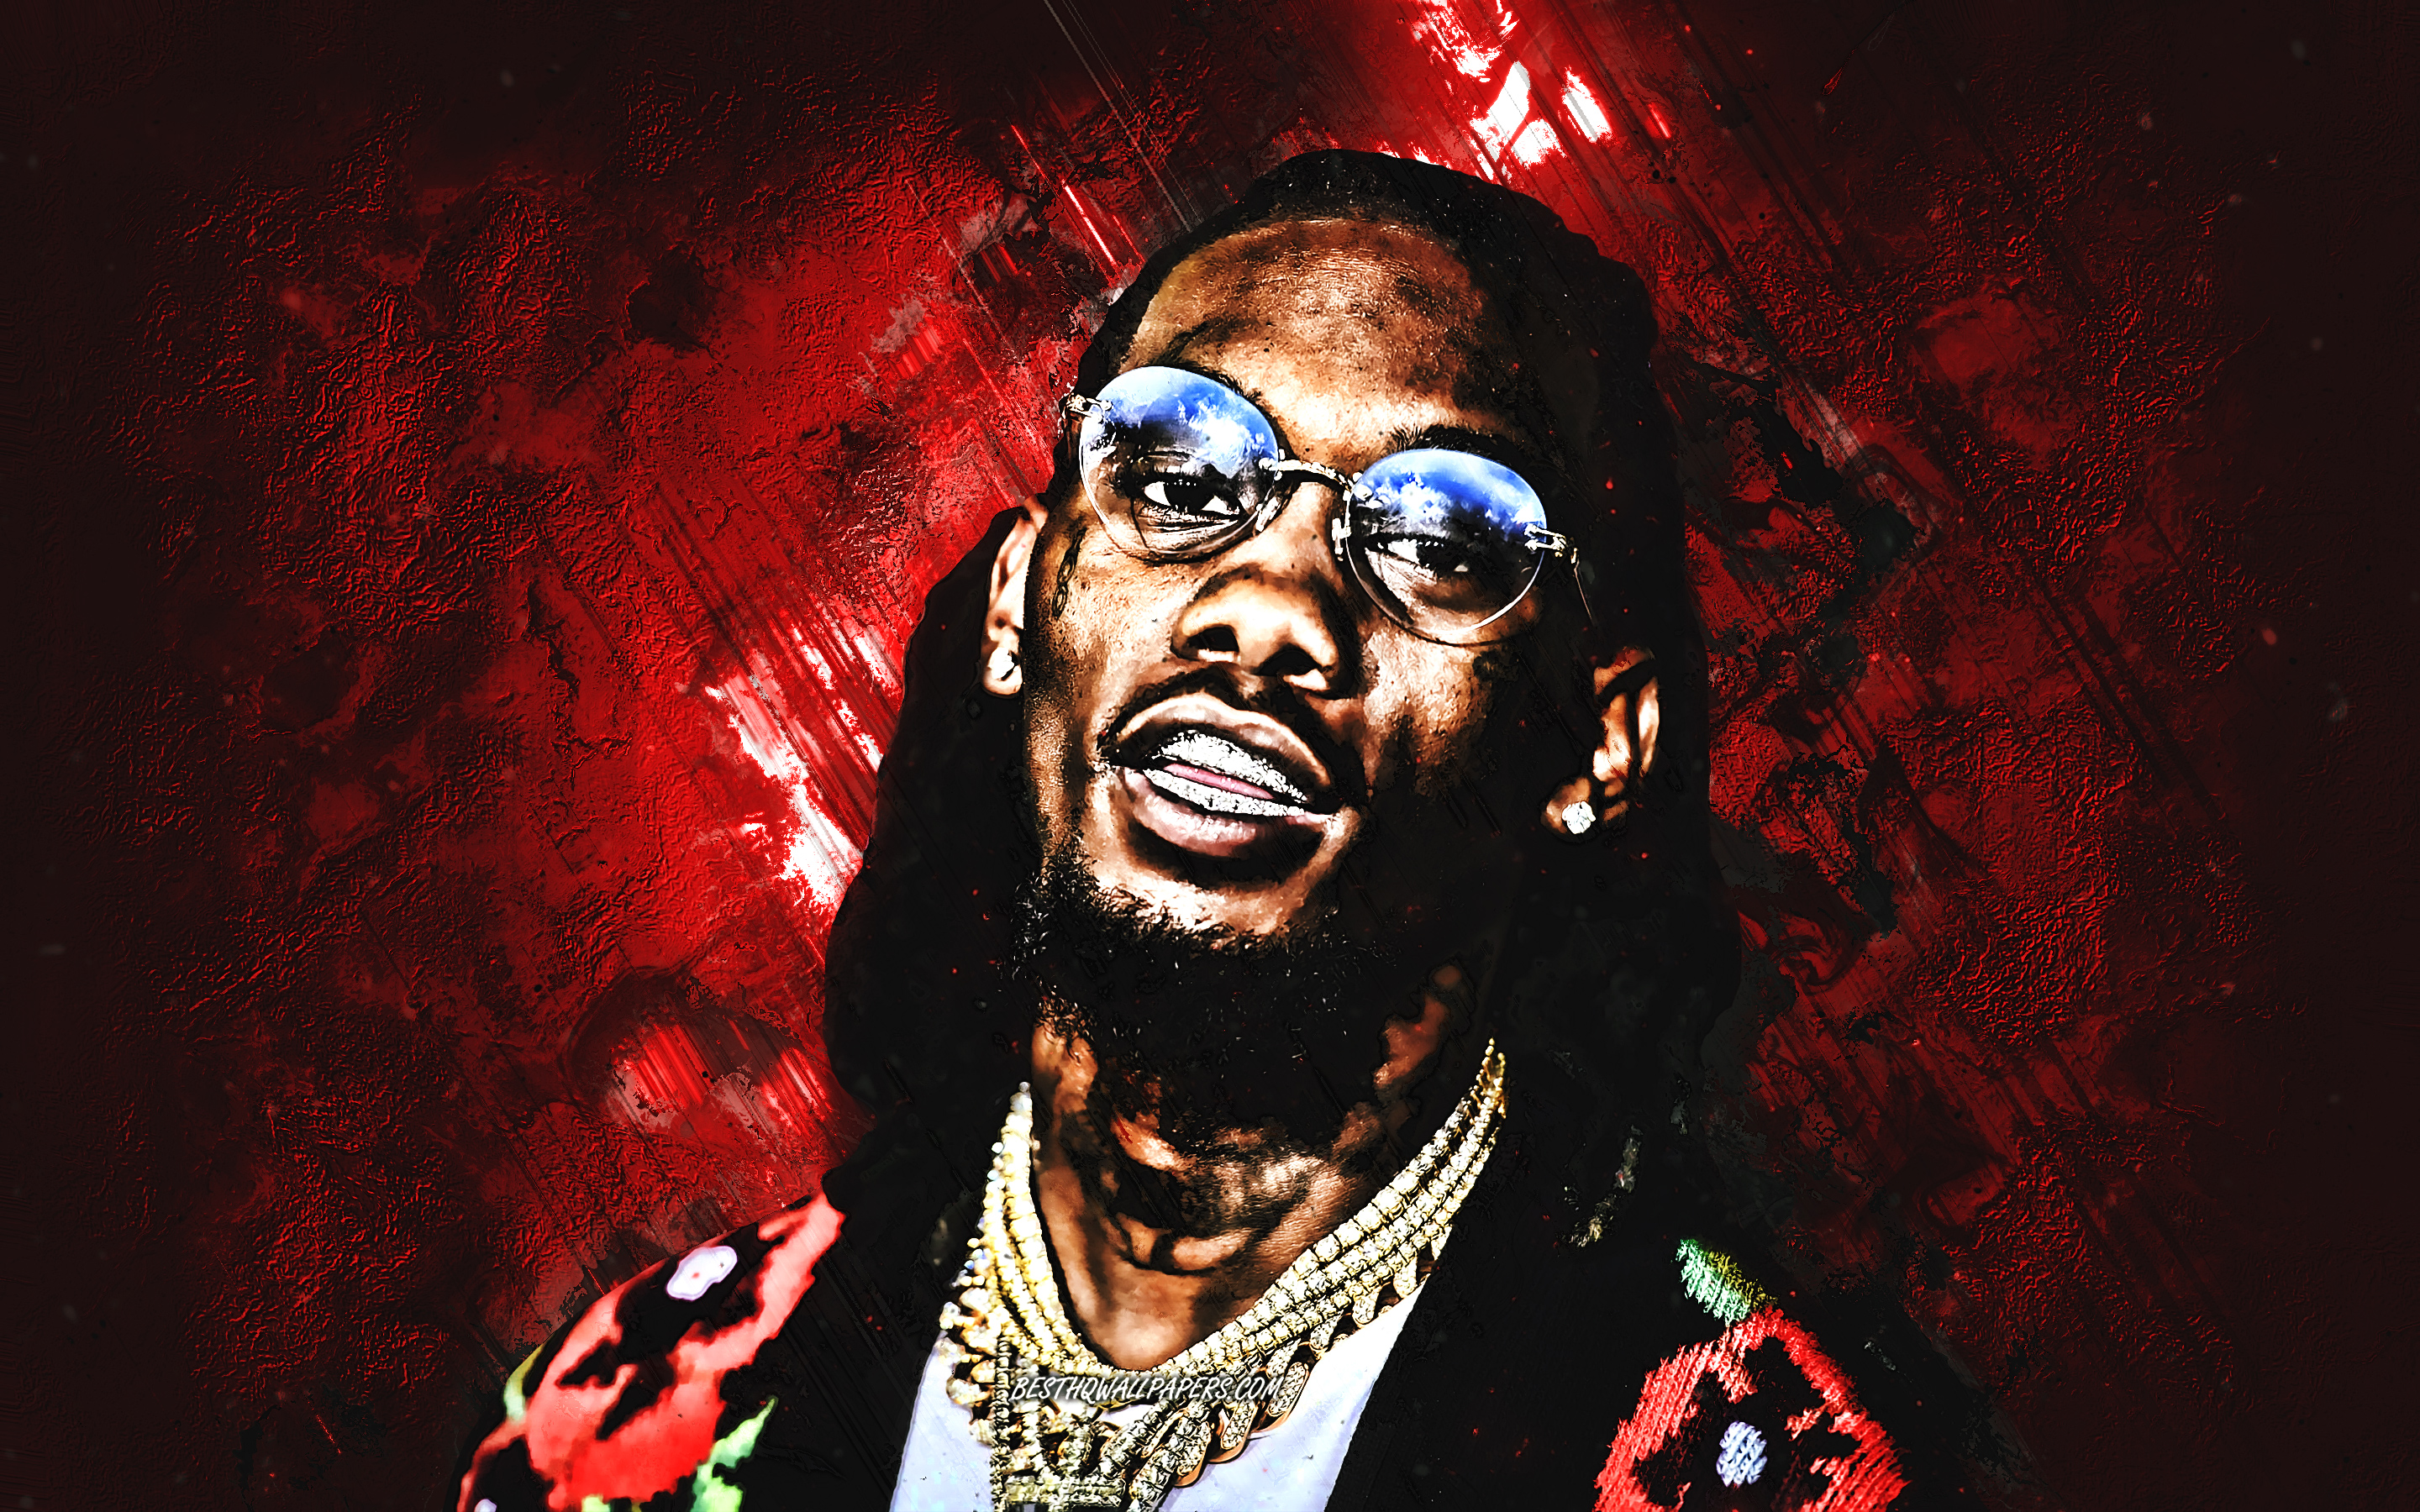 Download wallpaper Offset, Migos, Kiari Kendrell Cephus, portrait, american rapper, red stone background, creative art for desktop with resolution 2880x1800. High Quality HD picture wallpaper